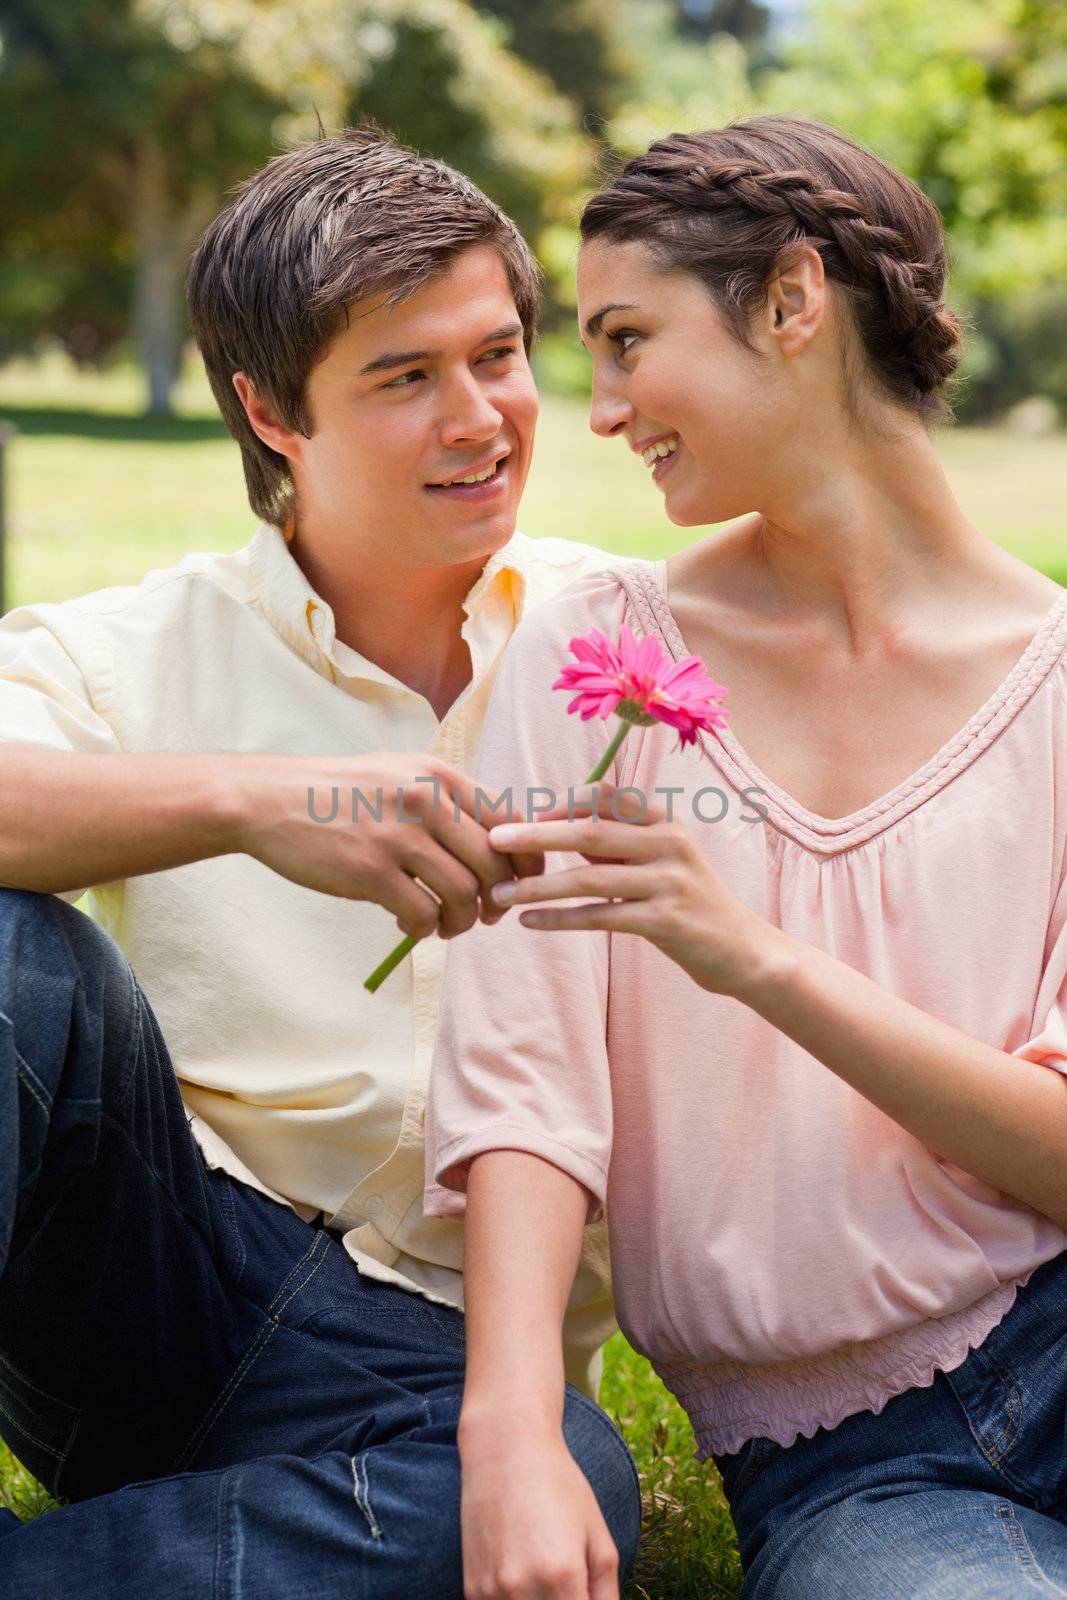 Smiling man giving a pink flower to a woman as they sit down on the grass